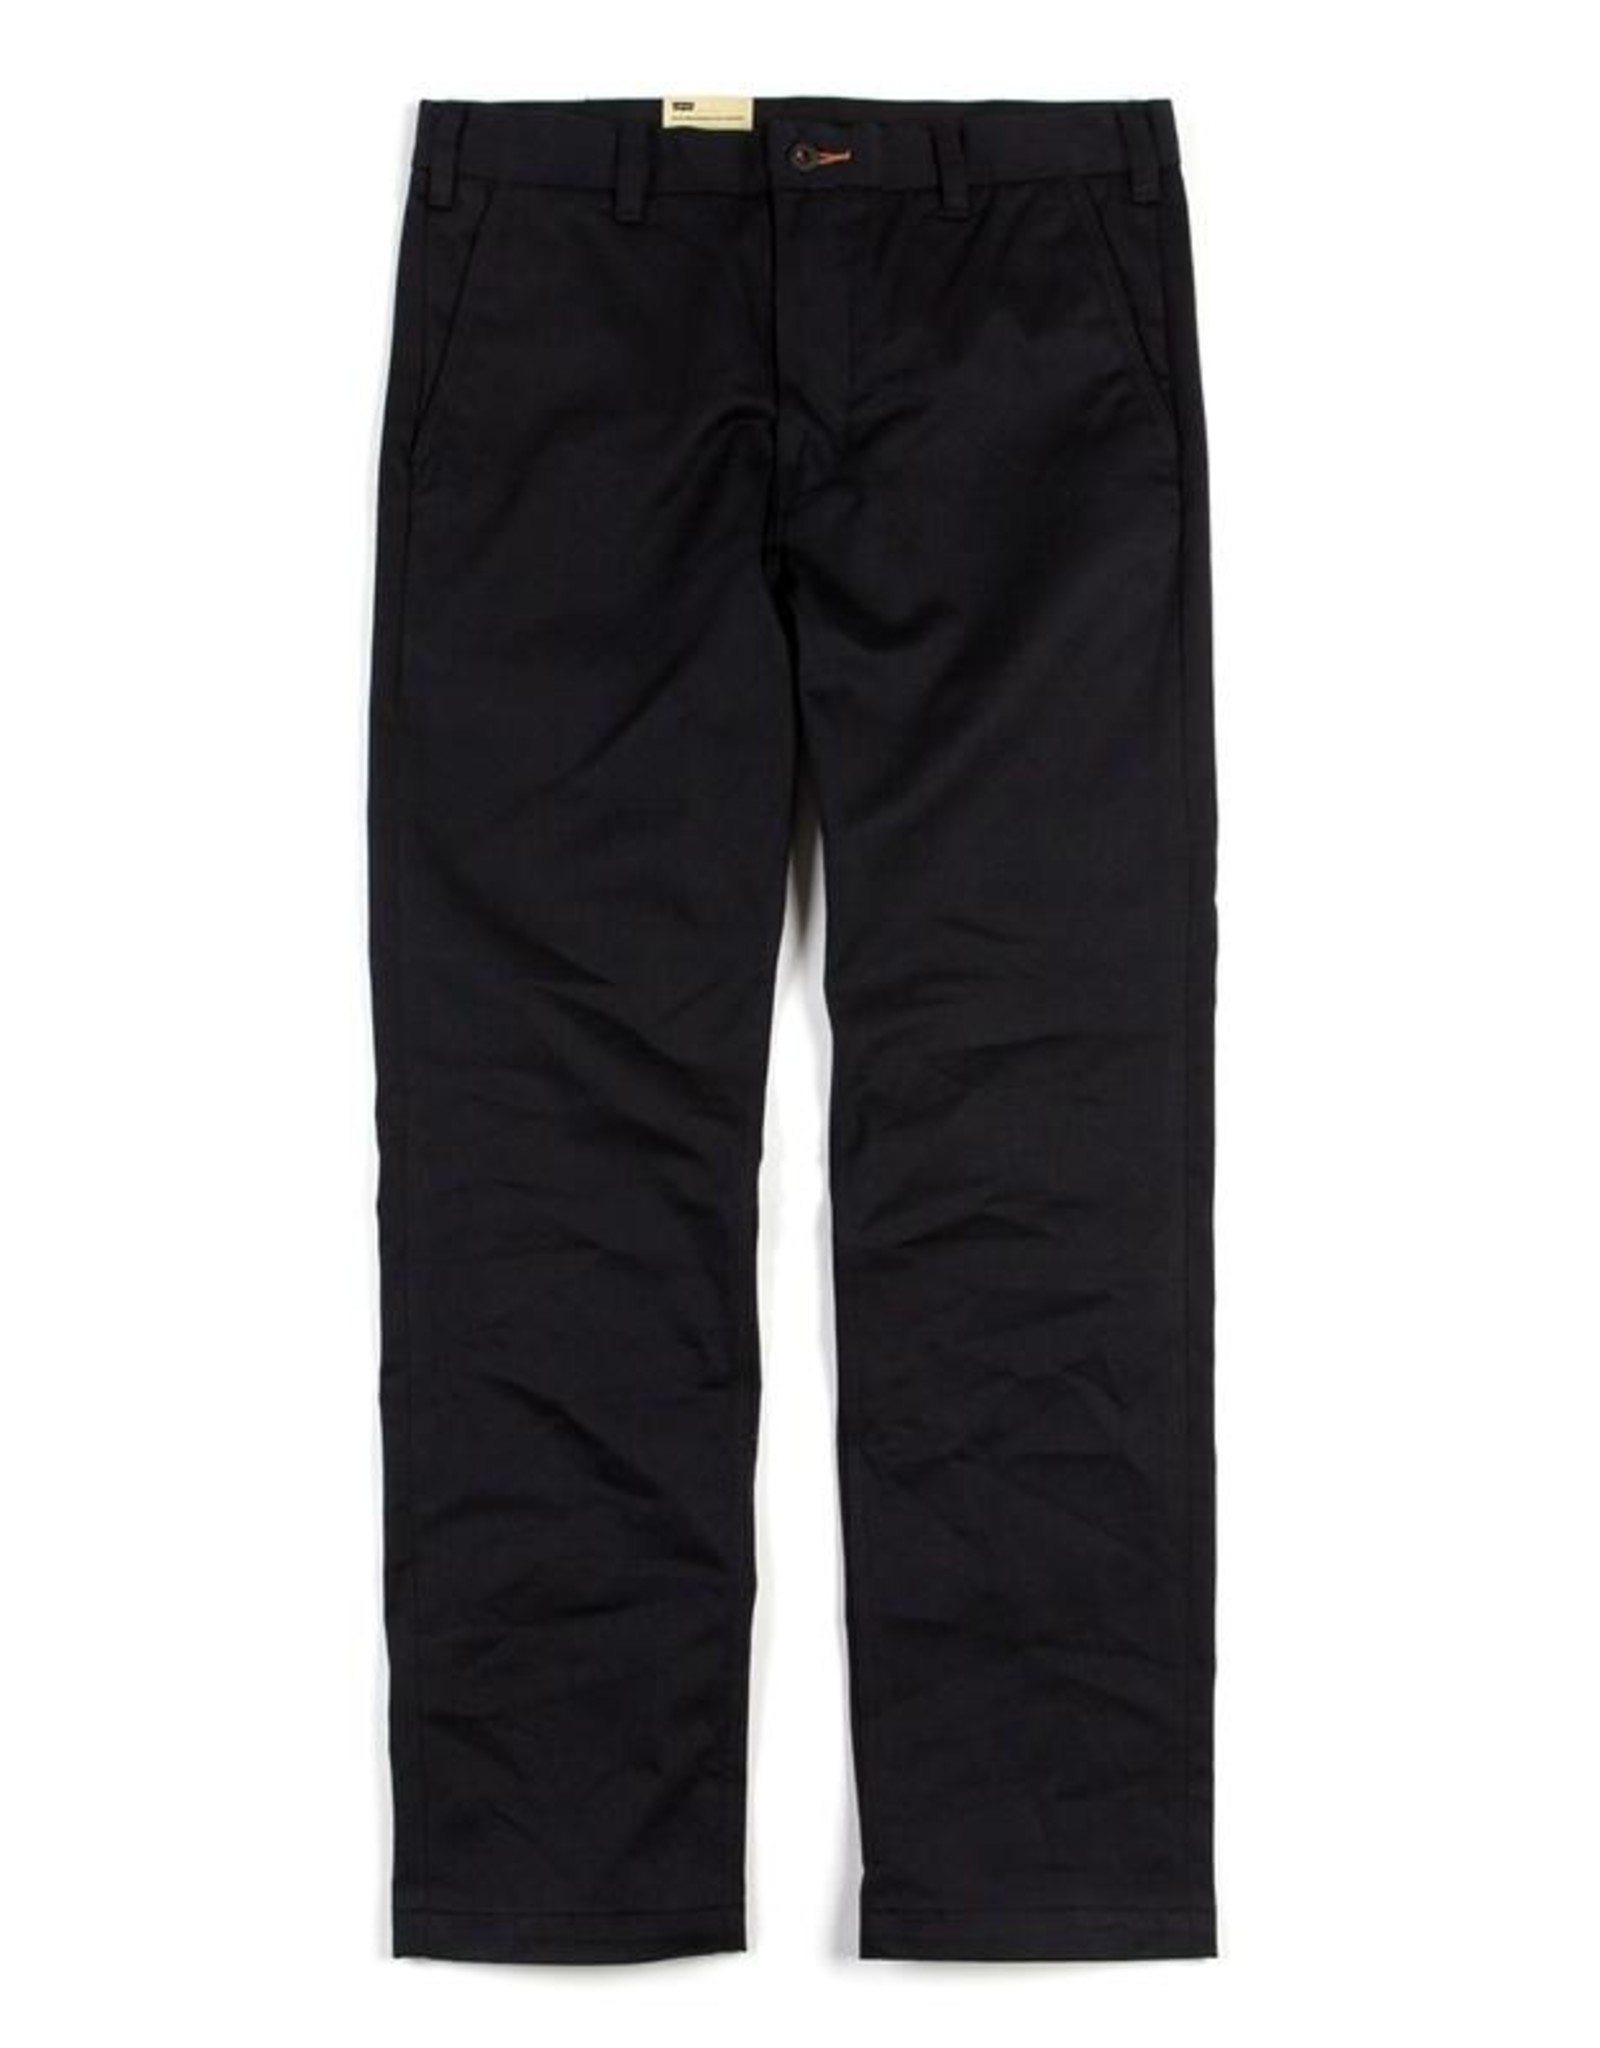 LEVI'S WORK CHINO PANT - BLACK - KINGSWELL